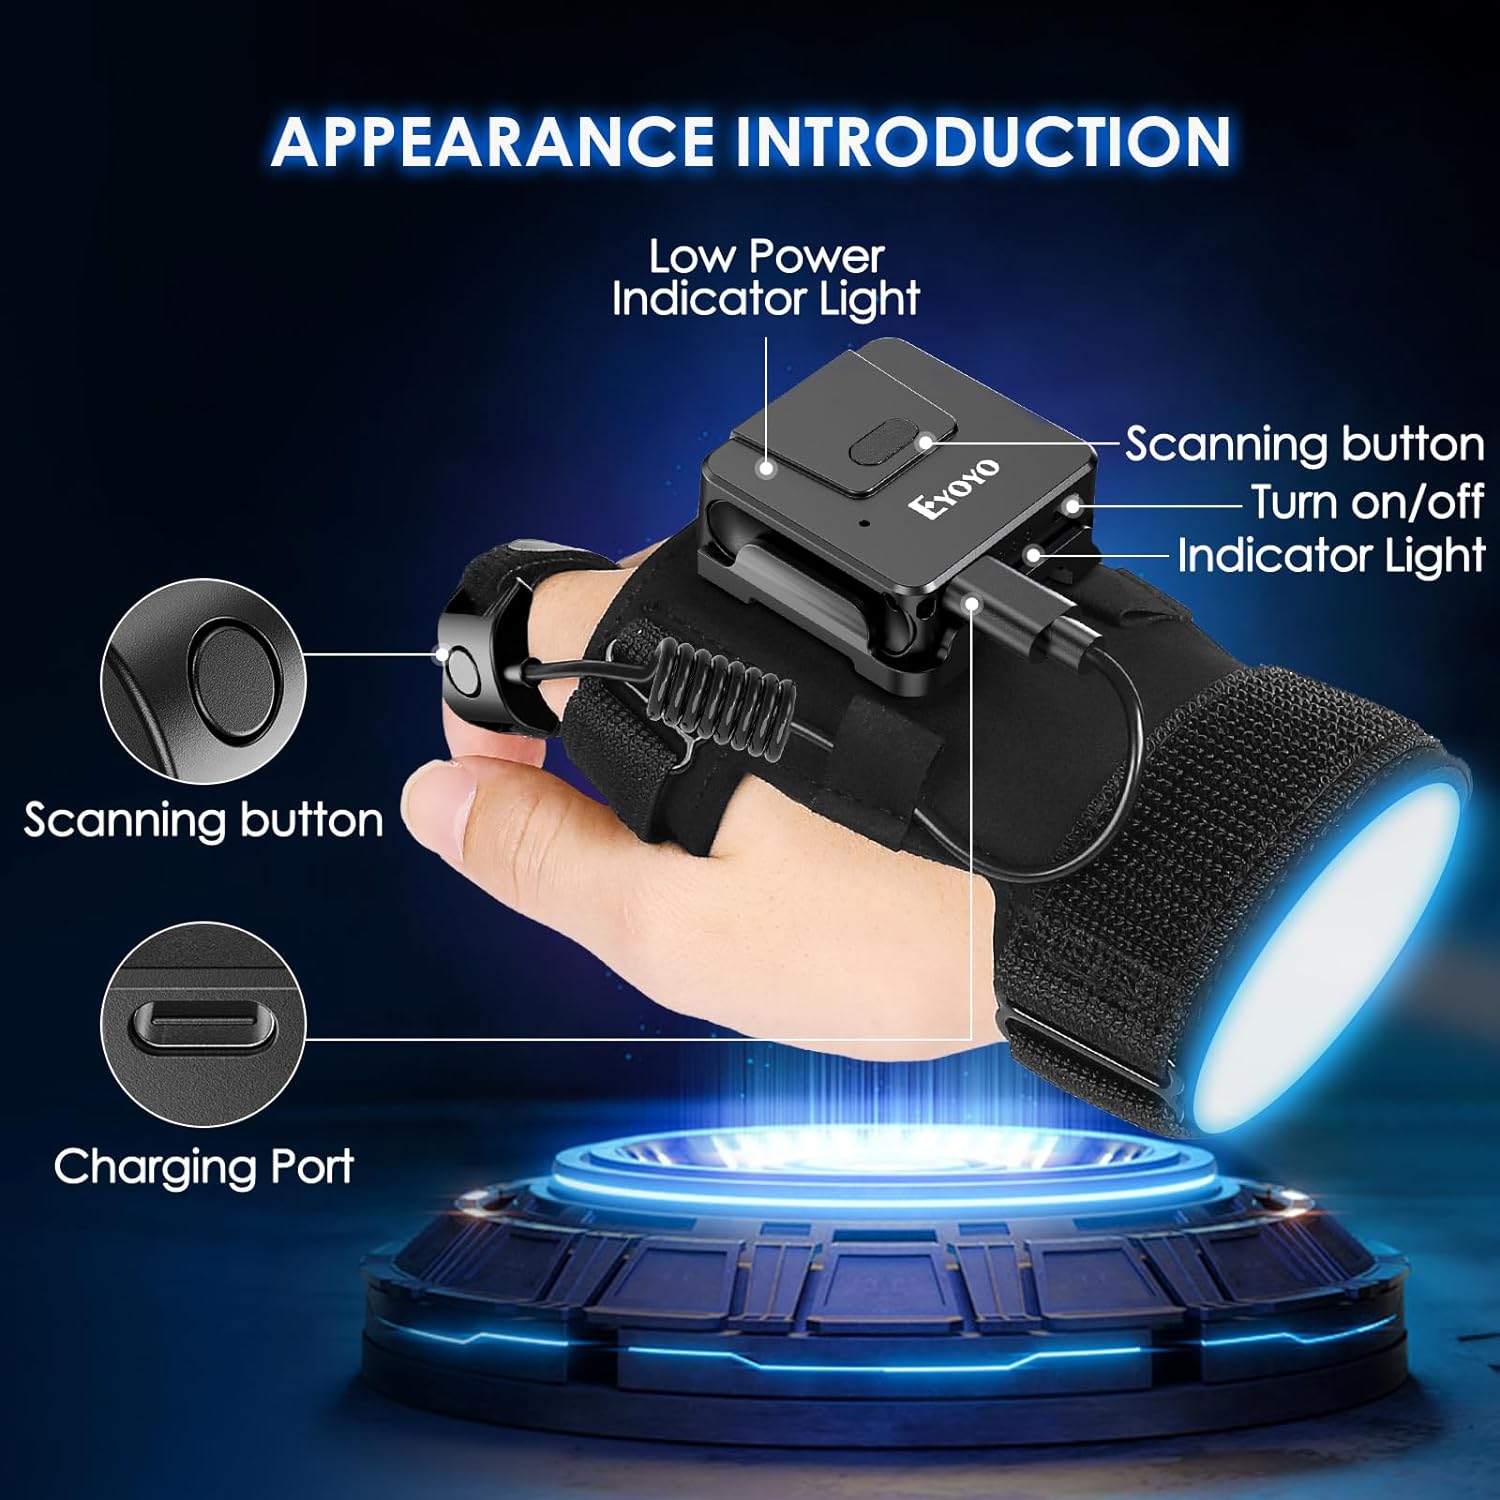 Eyoyo 1D 2D Wearable Glove QR Code Scanner, Finger Ring Bluetooth Barcode Scanner, Left&Right Hand Wearable, Portable Wireless Book Inventory Bar Code Reader Compatible with iPhone iPad Android